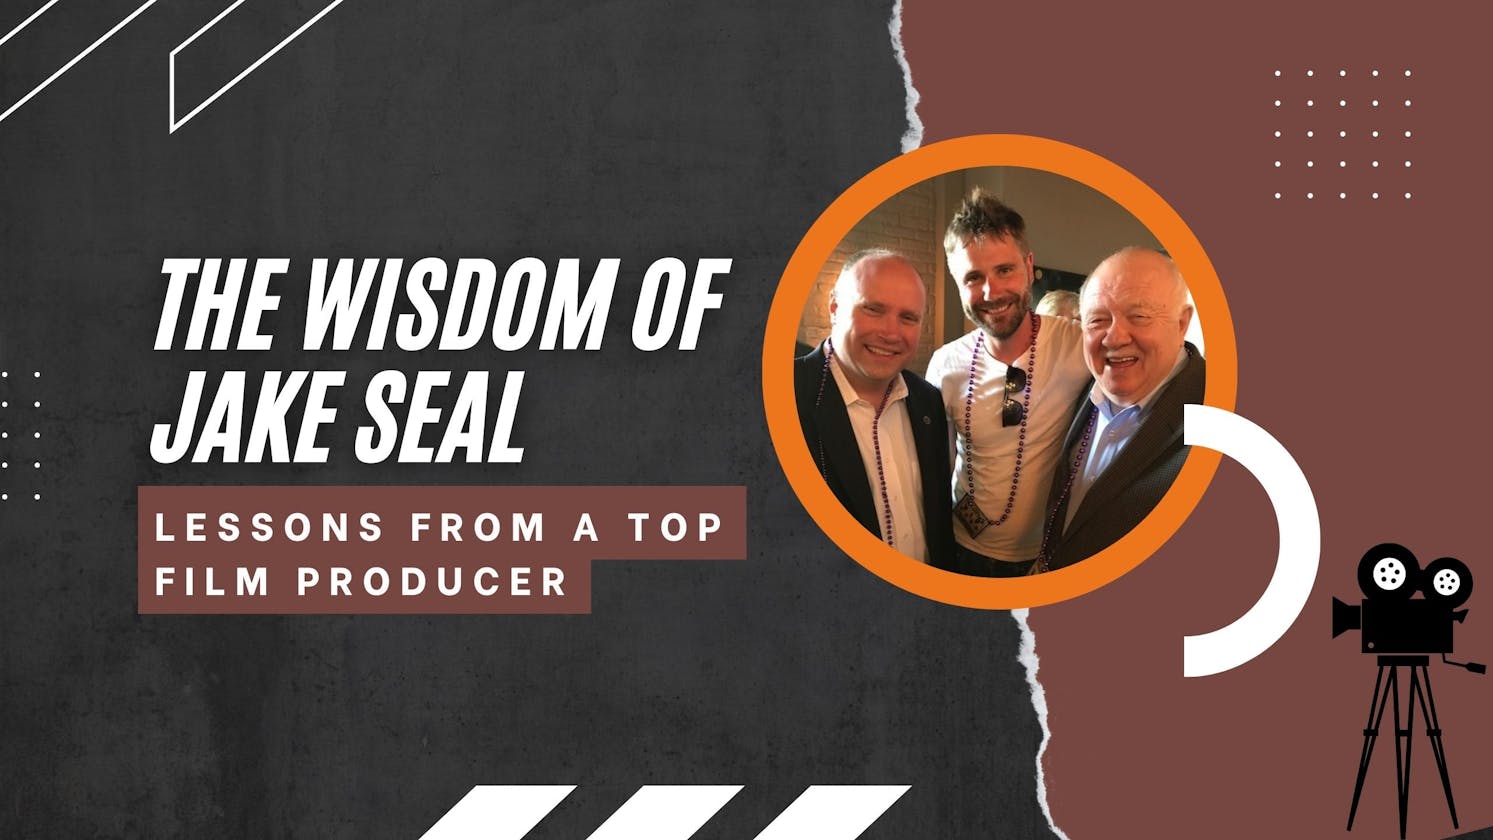 The Wisdom of Jake Seal - Lessons from a Top Film Producer